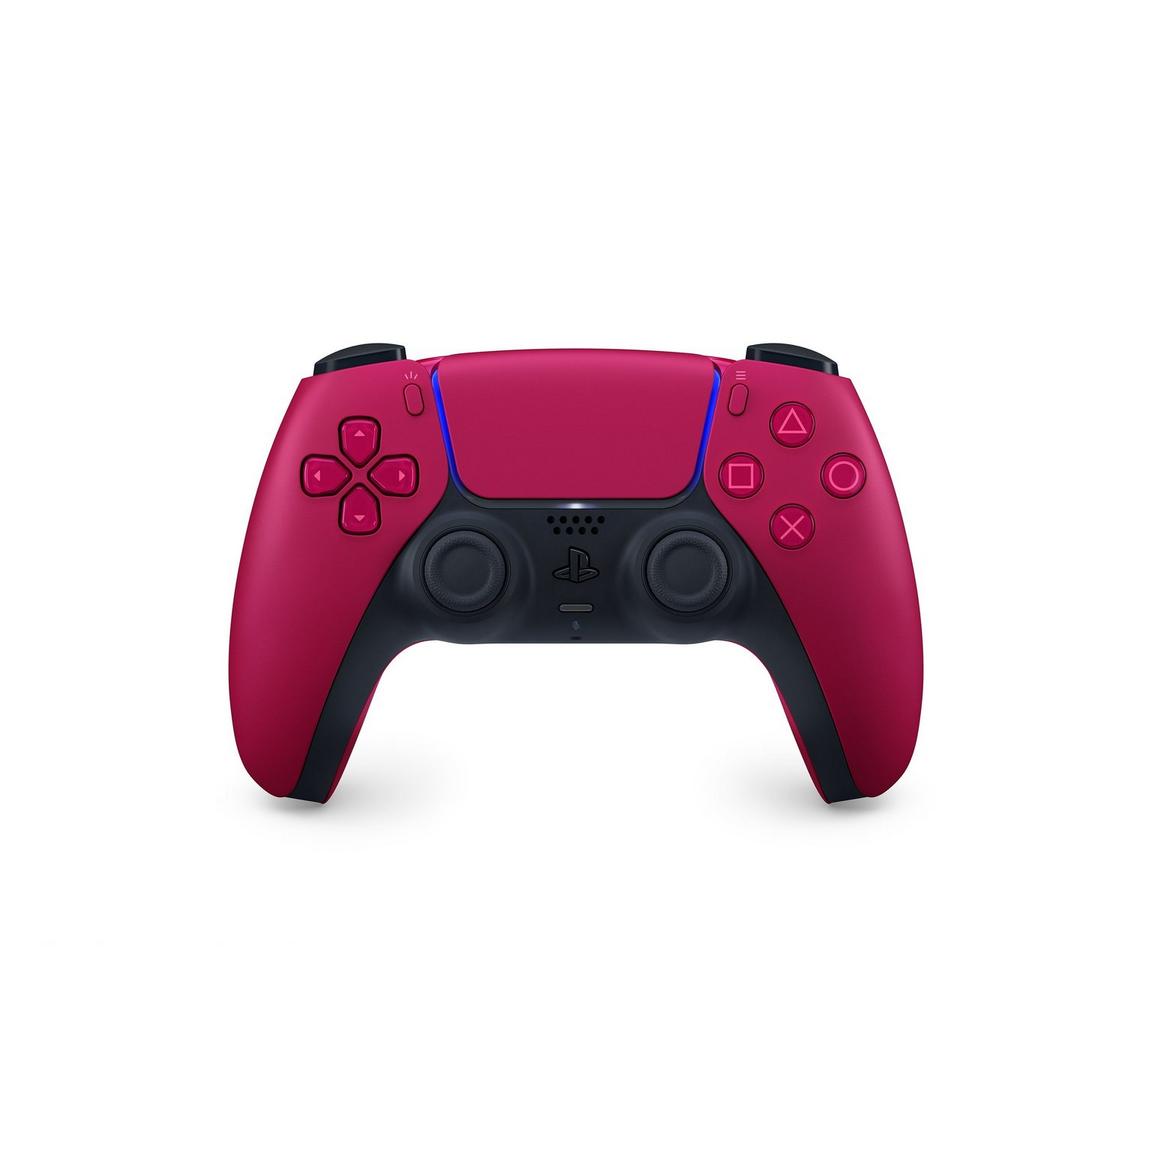 DualSense Wireless Controller [Cosmic Red] - (NEW) (Playstation 5)